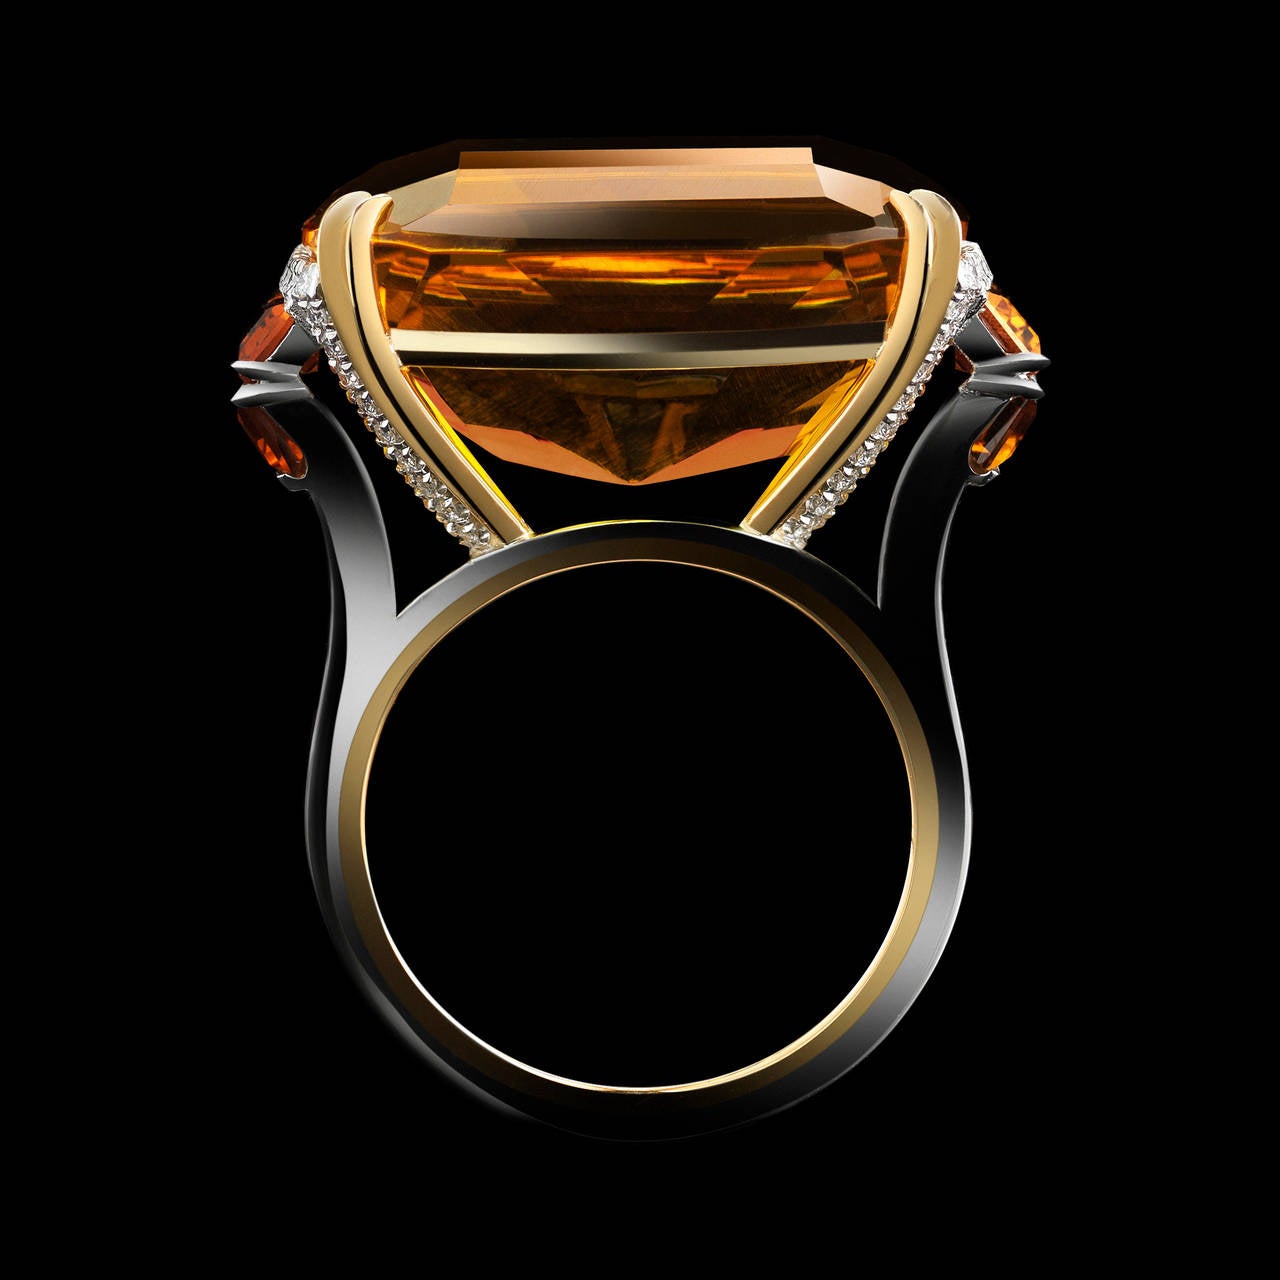 This ring features a 20.37 carat Cushion-cut deep-yellow citrine flanked by a pair of Trapezoid-shaped and Baguettes Citrine and fifty four 1mm Round Diamonds weighing a total of 1.95 carats. Ring is set in platinum around an 18 karat yellow gold AM